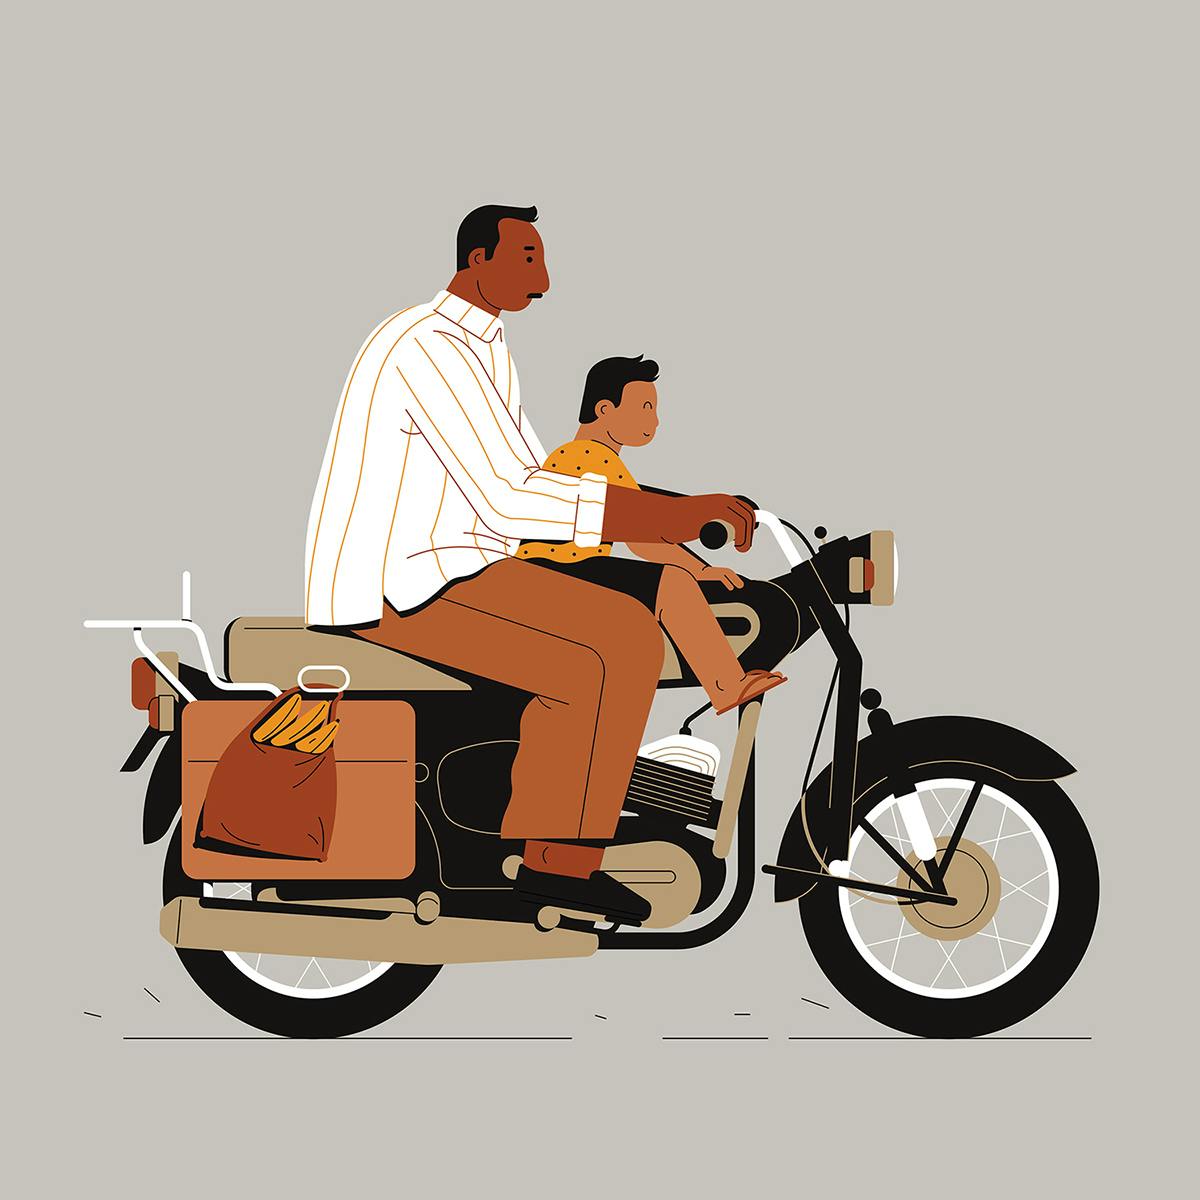 Man and boy riding motorcycle